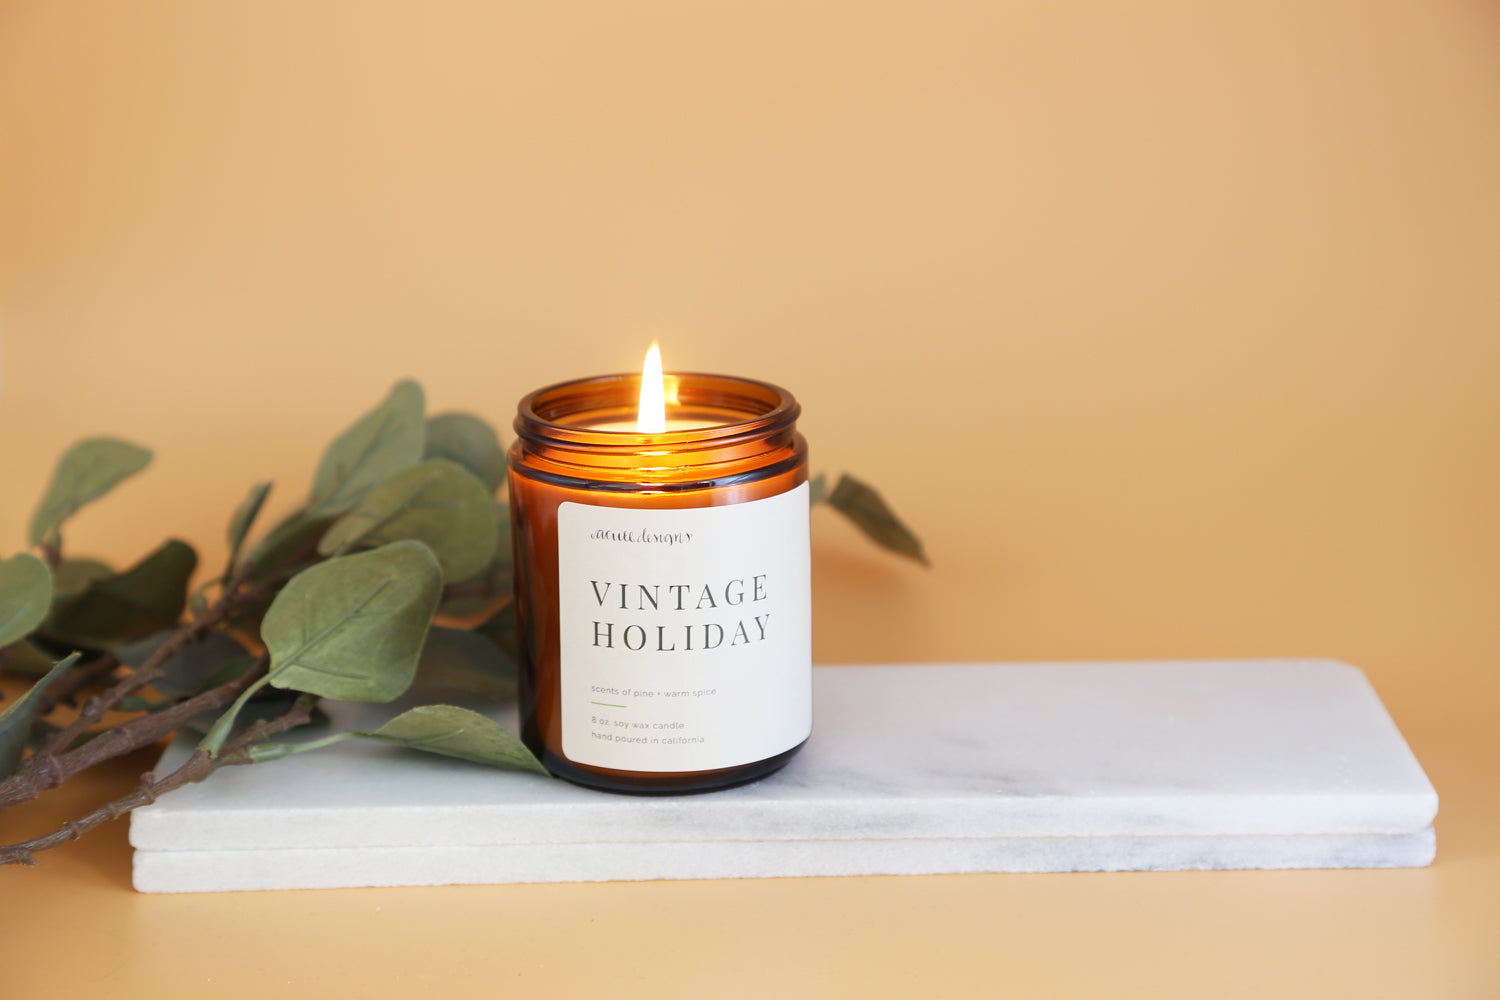 Vintage Holiday Candle - Scented Holiday Candle, Scents of pine and wa –  Acute Designs